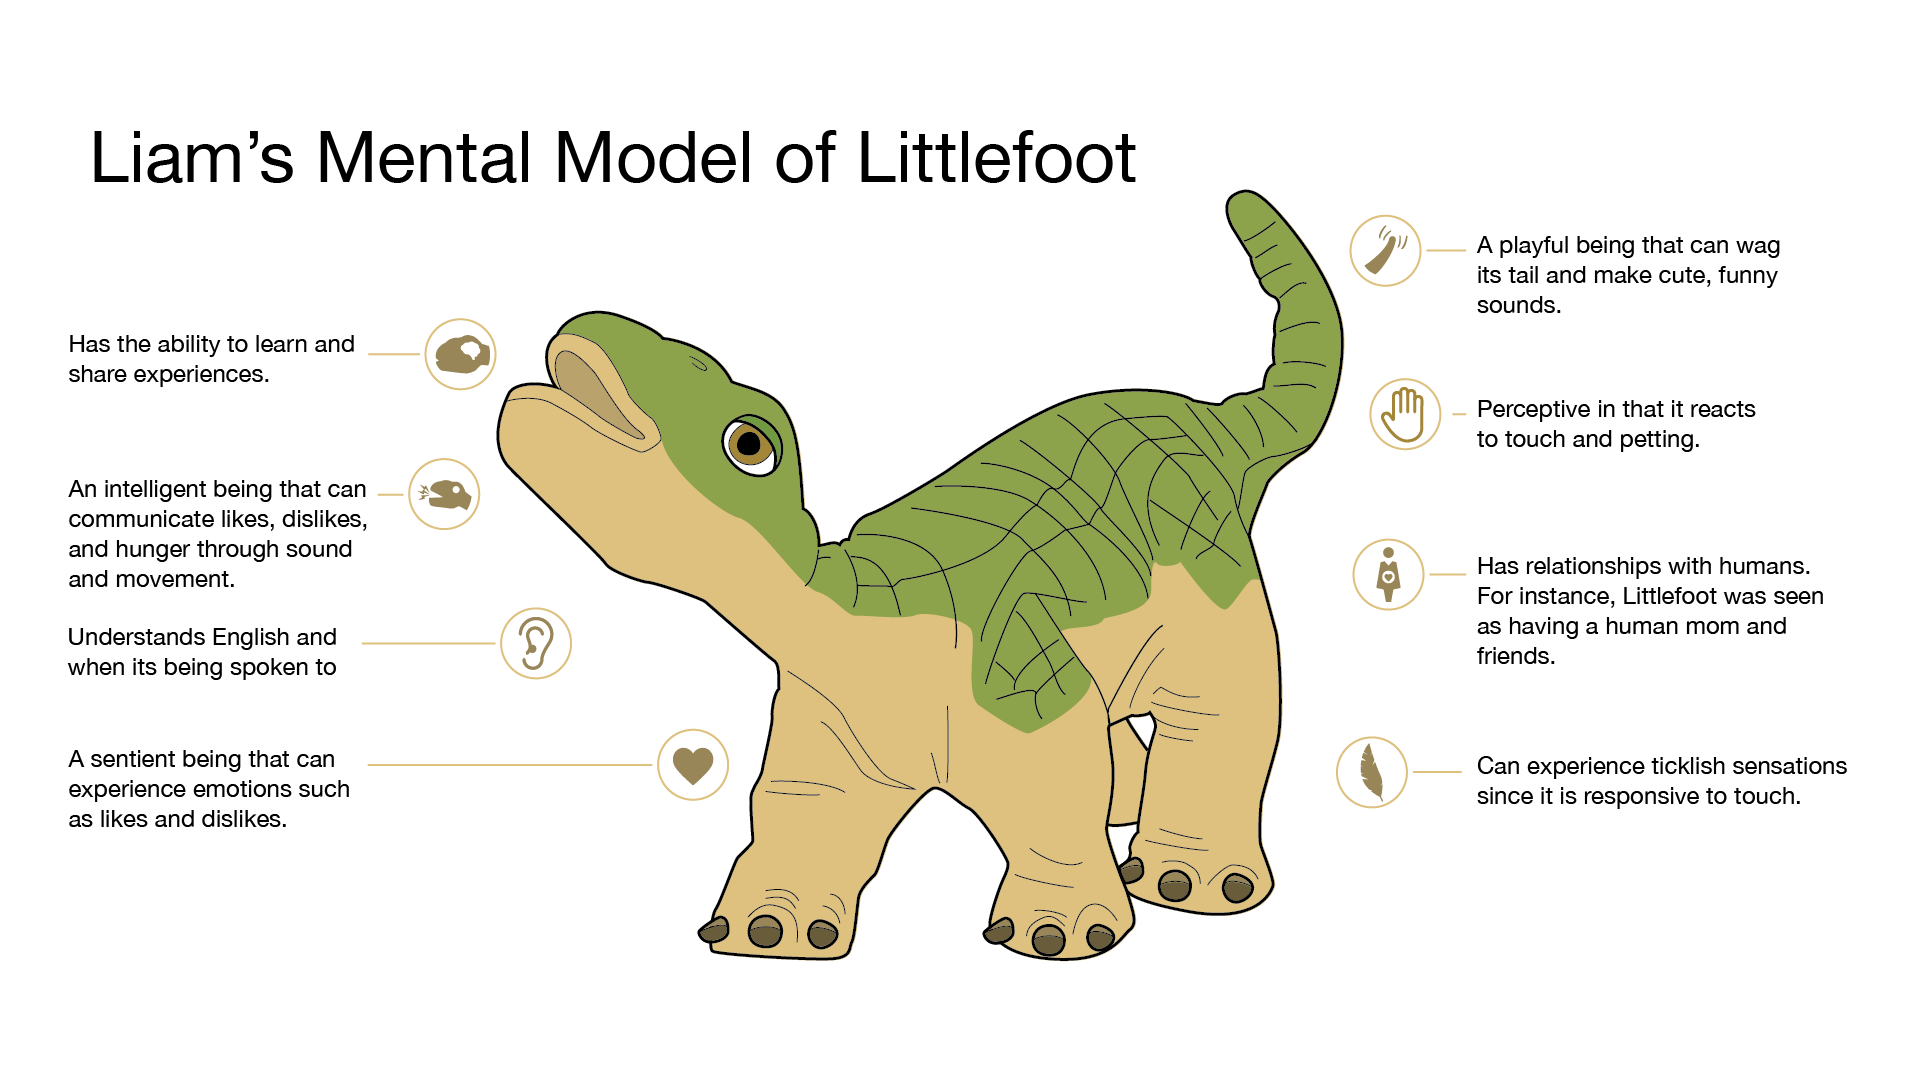 Framework of how people interacted with "Littlefoot" the Pleo RB robot dinosaur.